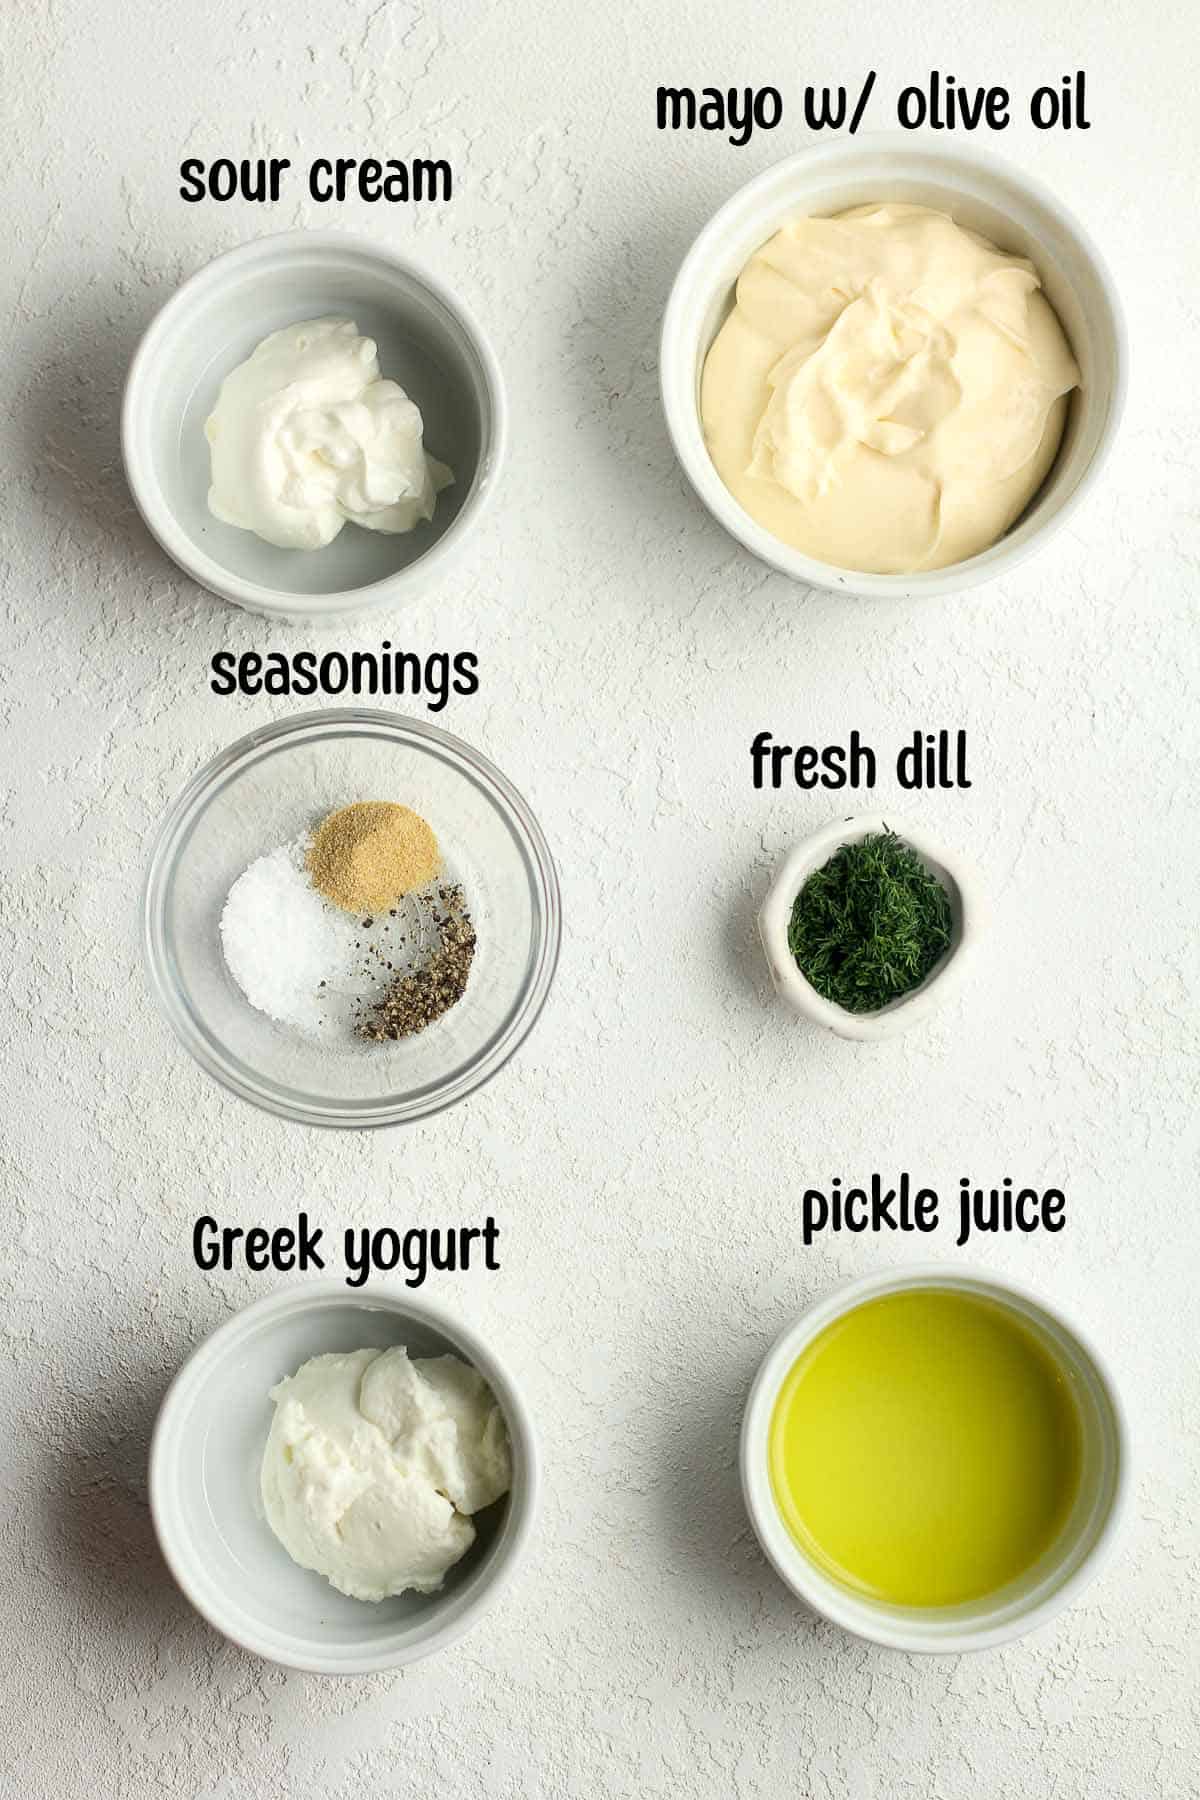 The labeled ingredients for the ranch dressing.